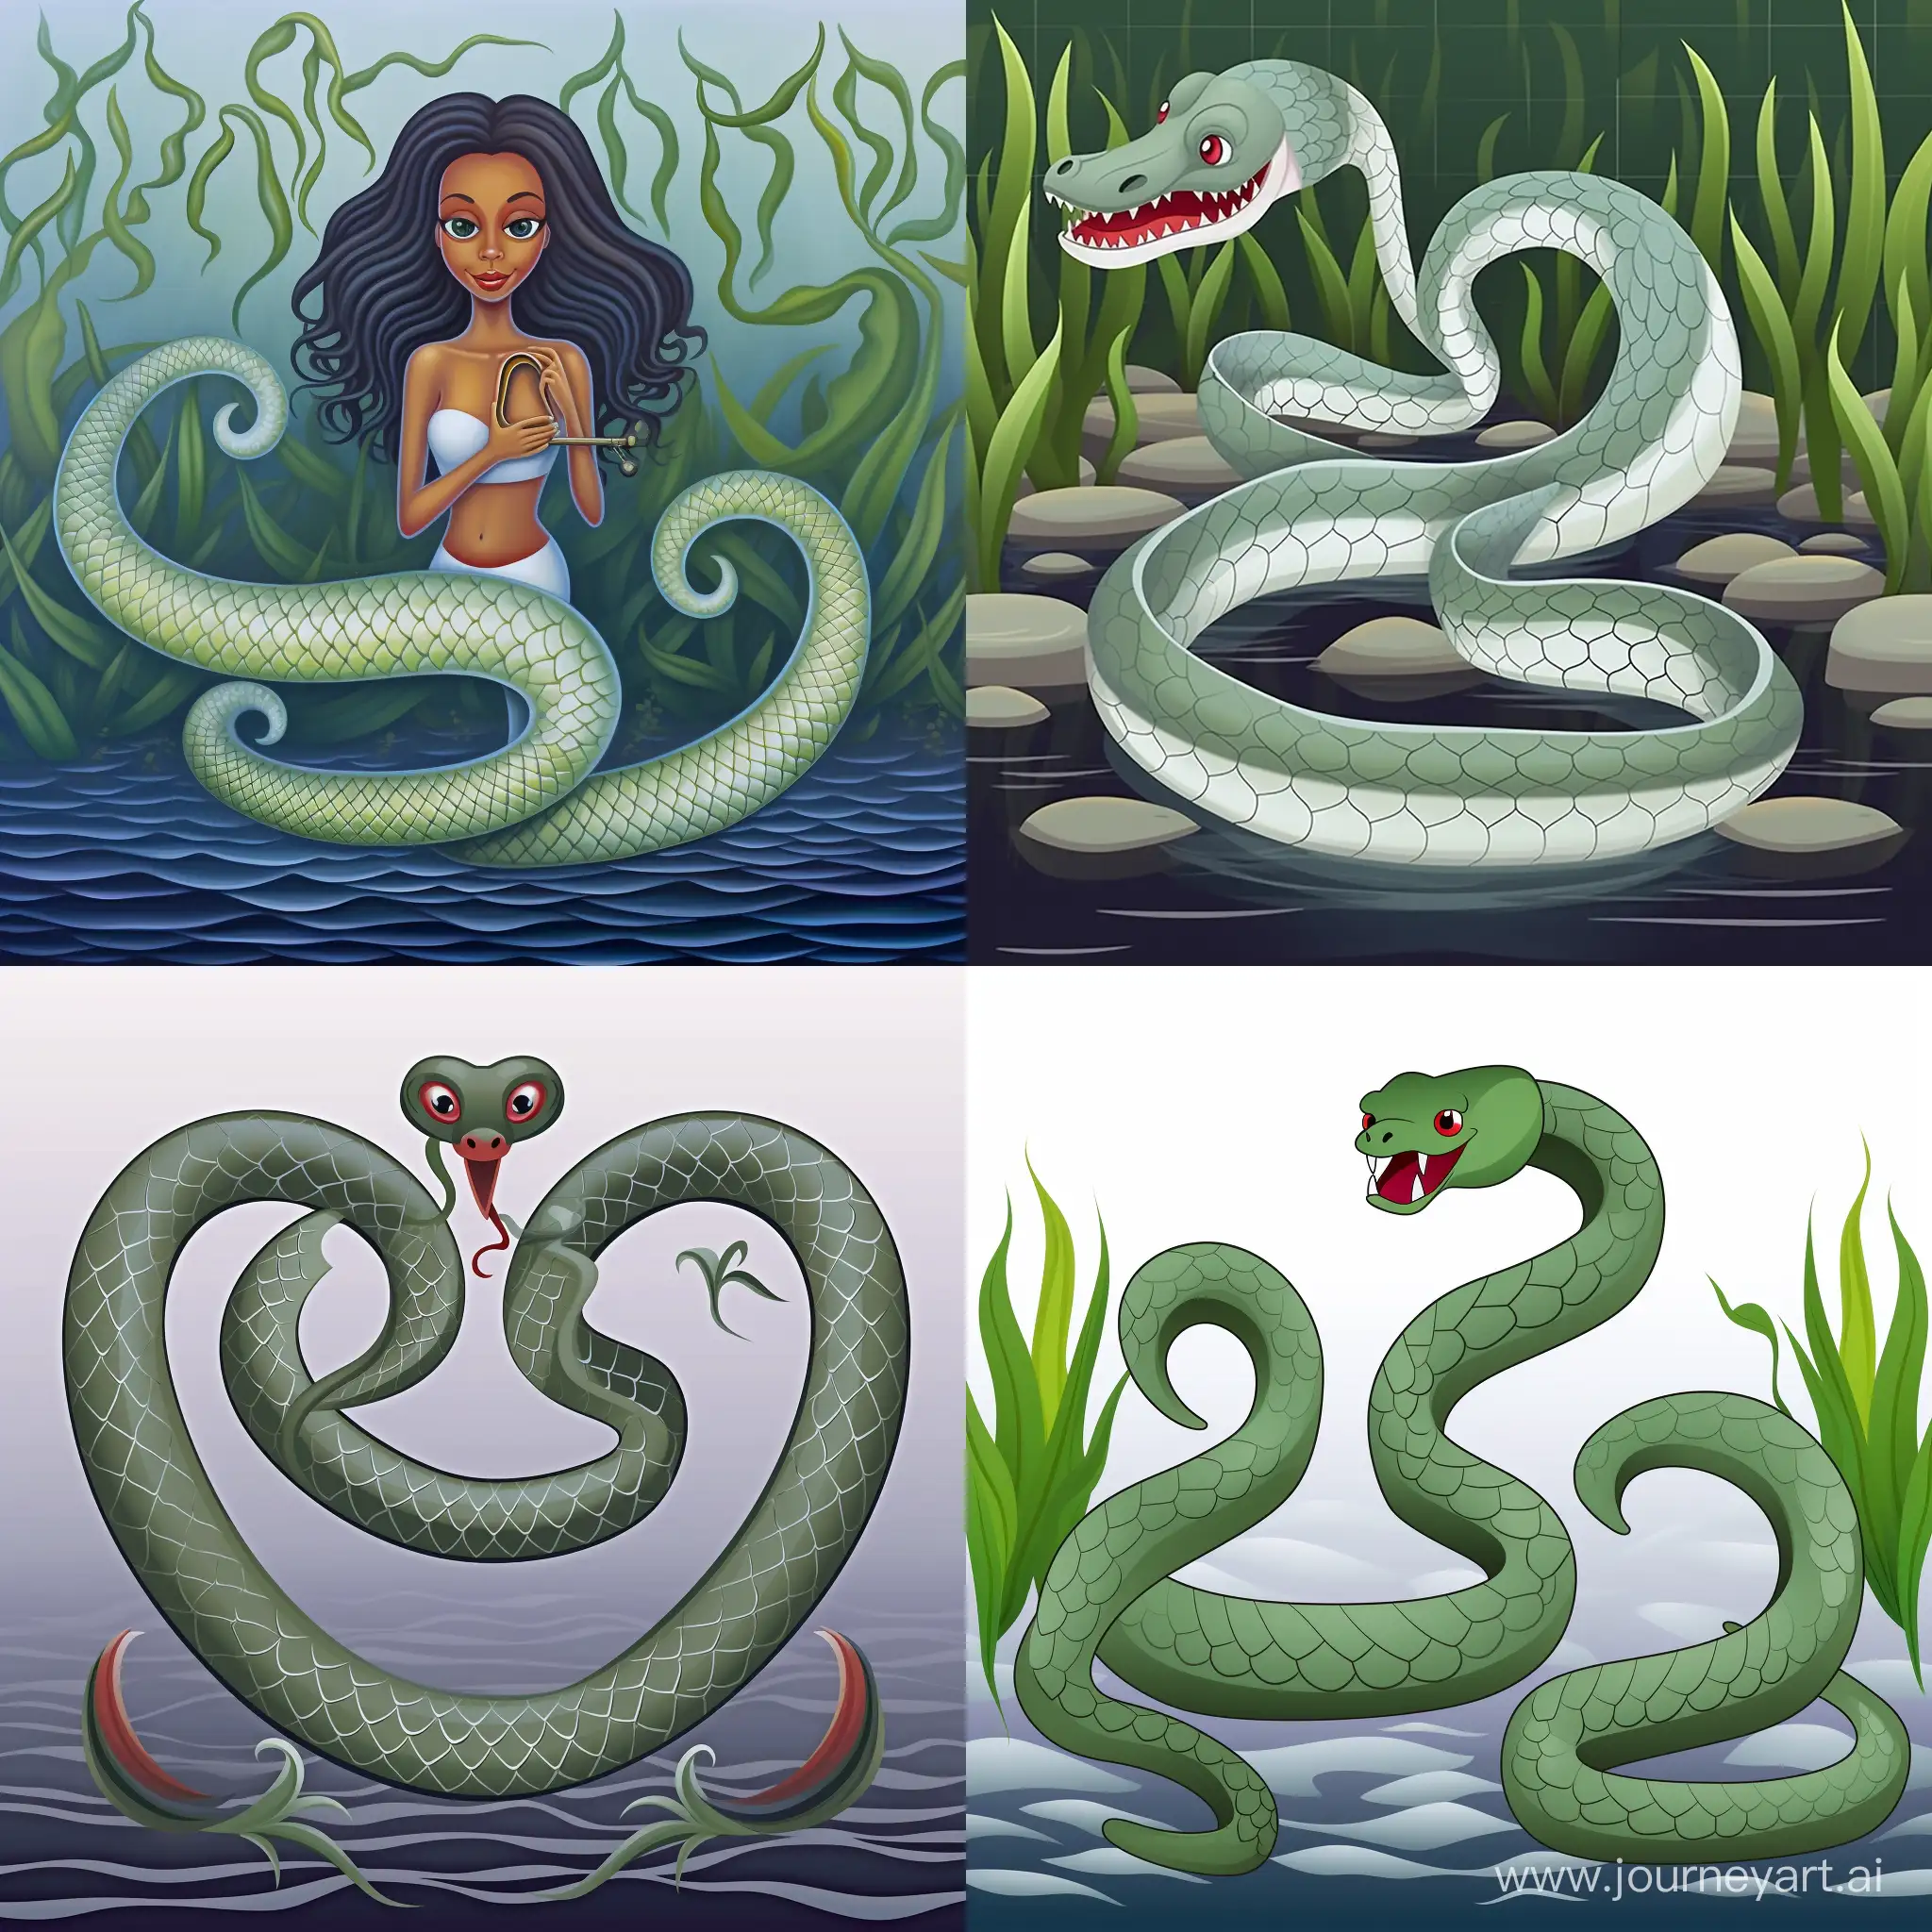 Enchanting-Serpent-of-Love-and-Beauty-in-Green-Waters